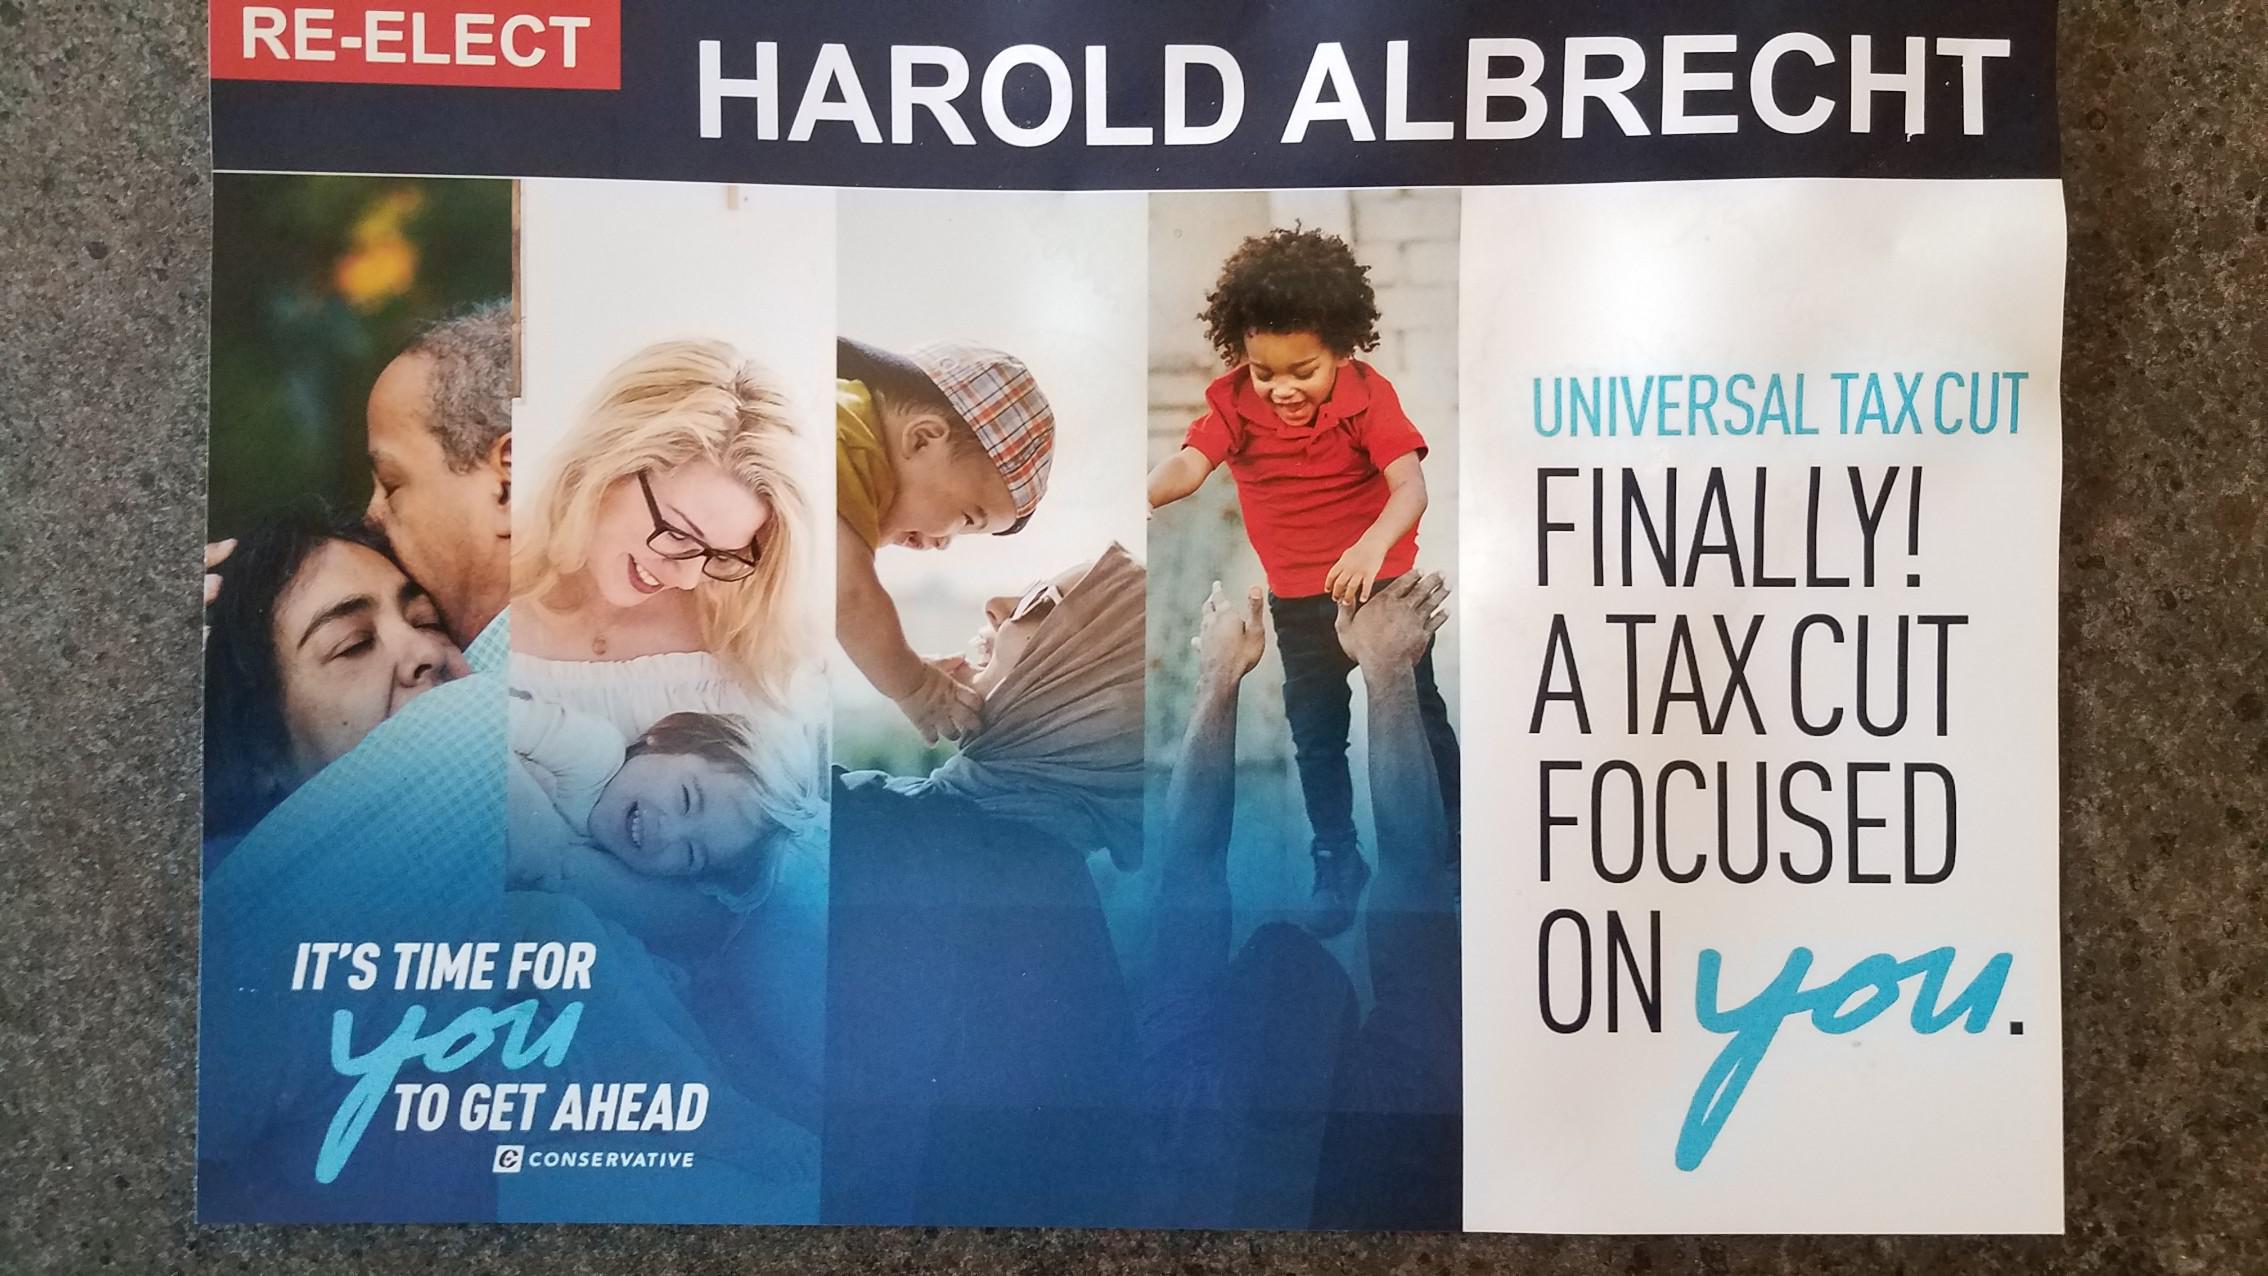 political political-memes political text: RE-ELECT IT's TIME FOR CONSERVATIVE HAROLD ALBRECHT UNIVERSAL TAX CUT CUT FOCUSED 